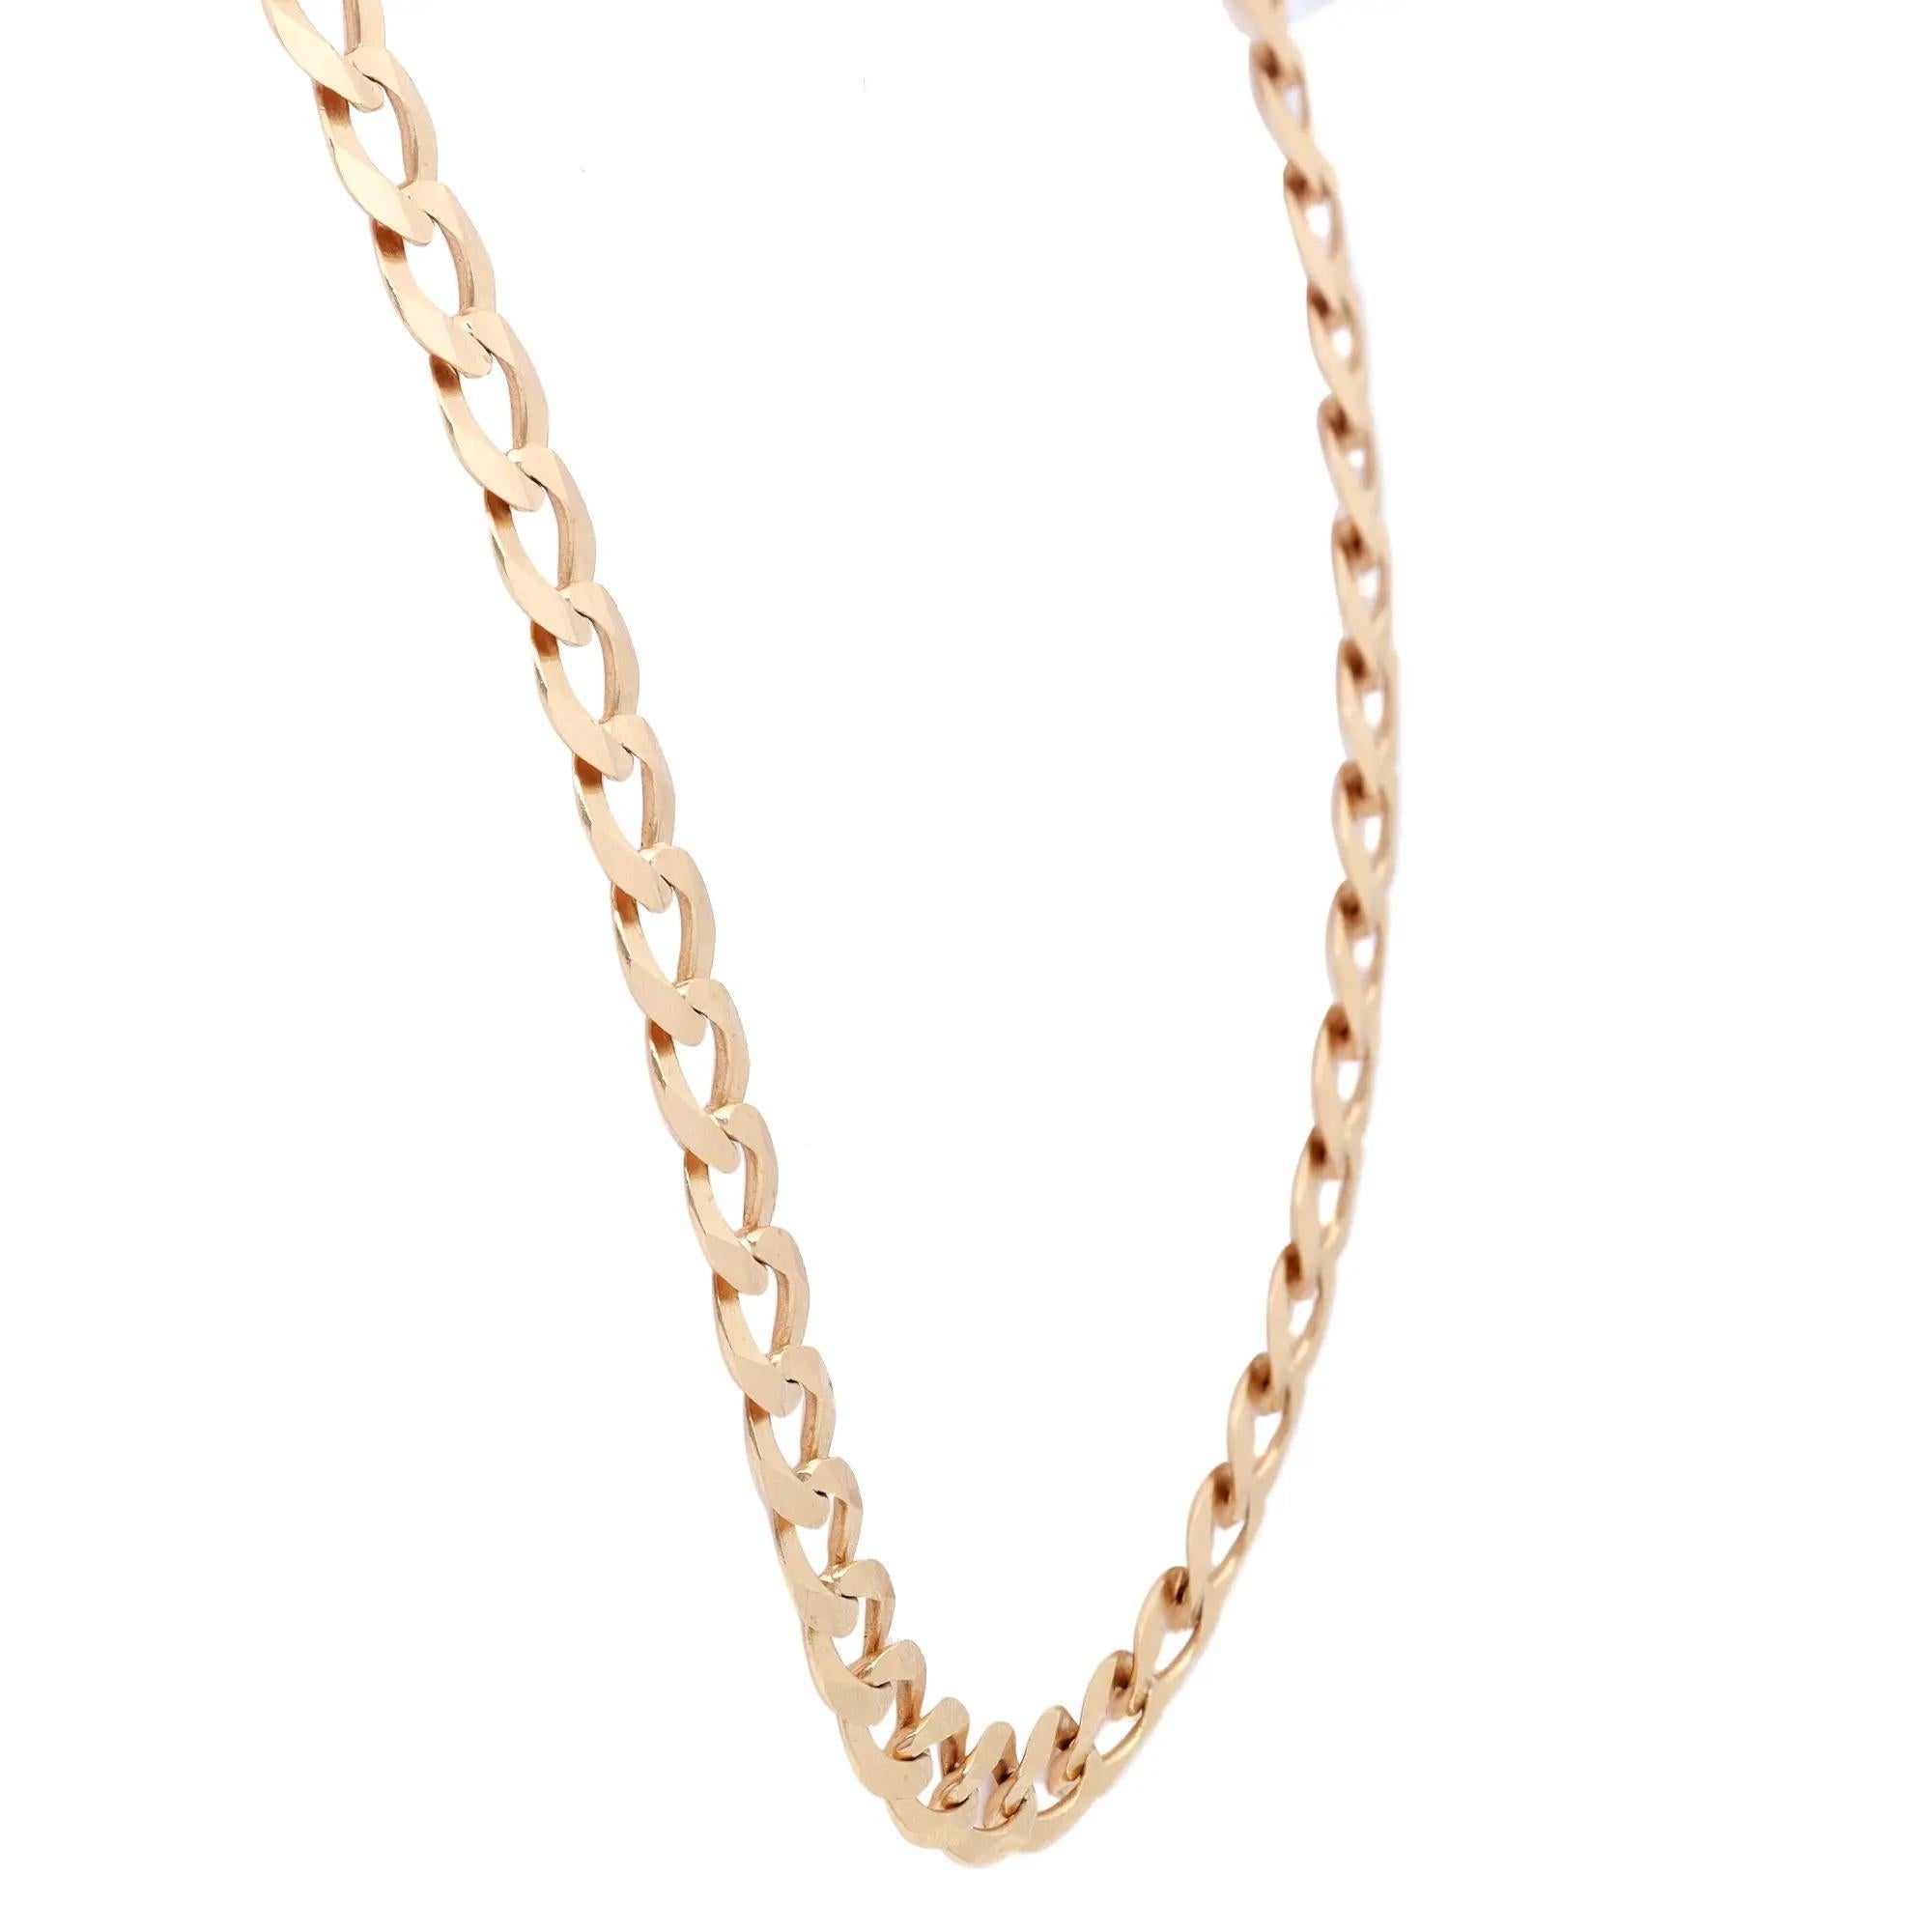 This classic Cuban link solid chain is handcrafted in highly gleaming 14K yellow gold. The chain is 24 inches in length and 6.9mm in width. Total weight: 27.90 grams. This chain securely locks with a lobster clasp. Looks great on men and women. Wear